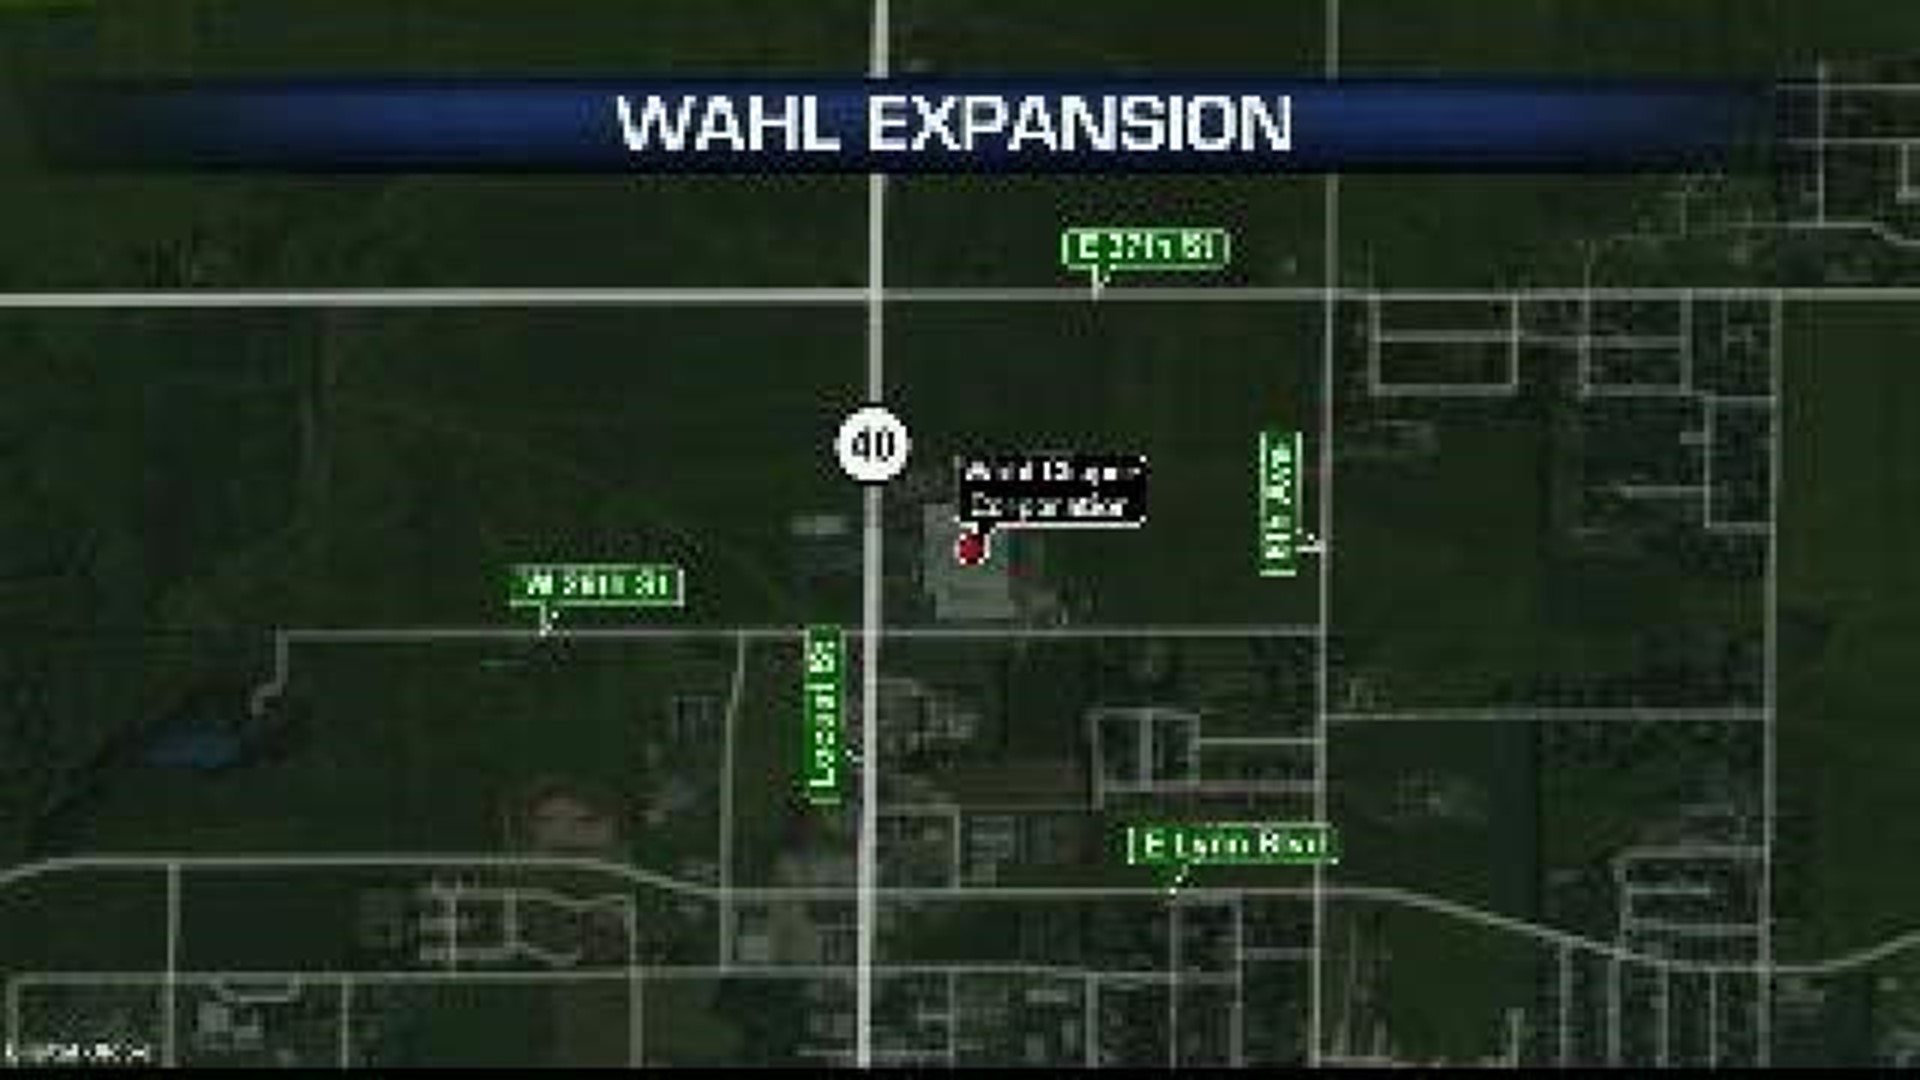 Wahl expansion